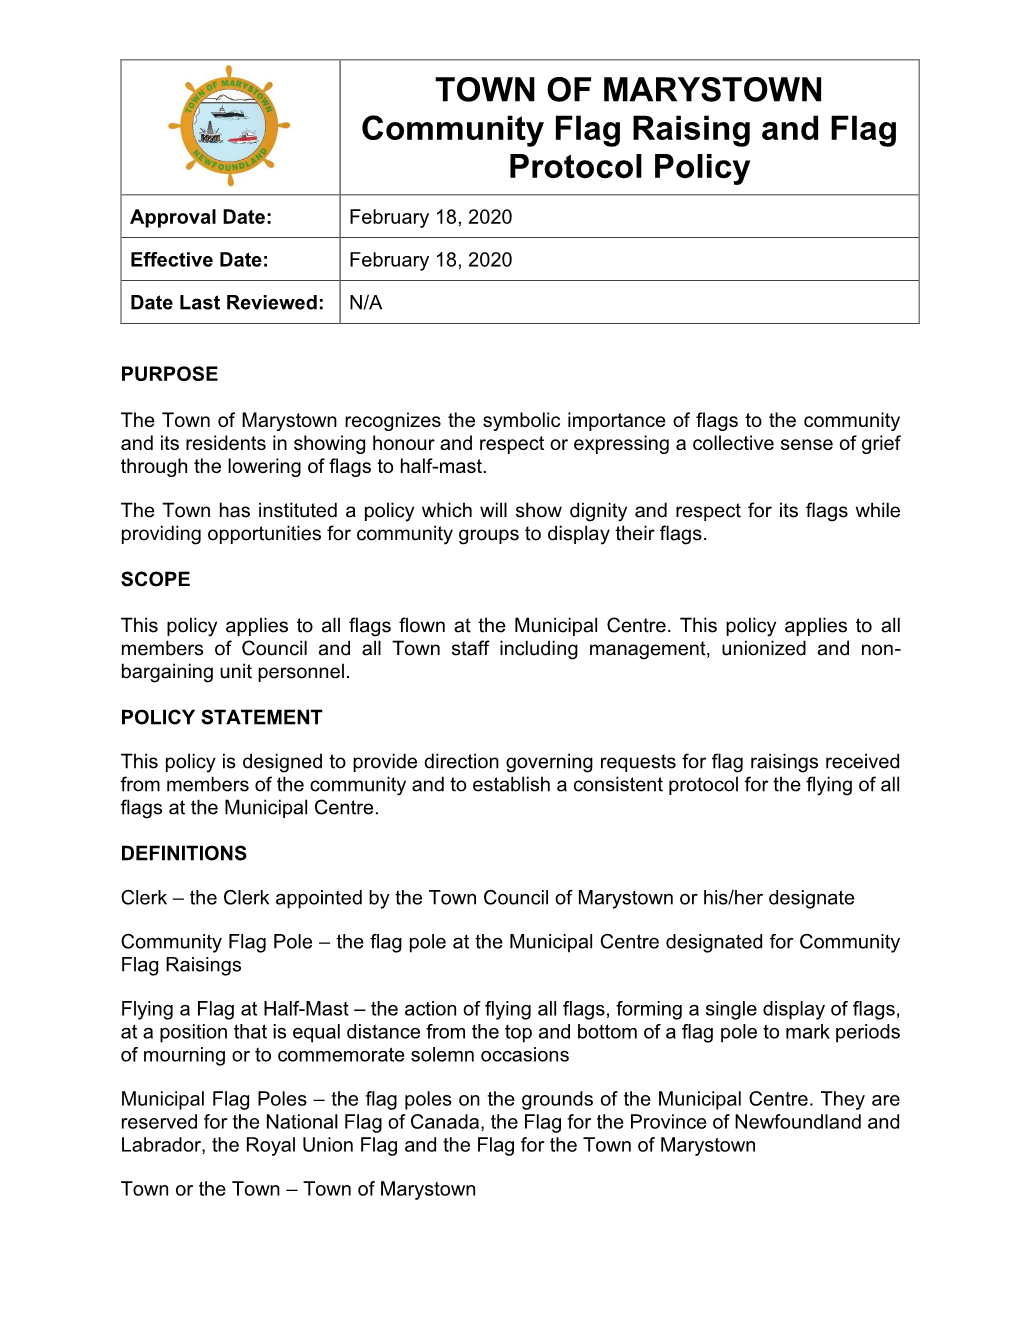 TOWN of MARYSTOWN Community Flag Raising and Flag Protocol Policy